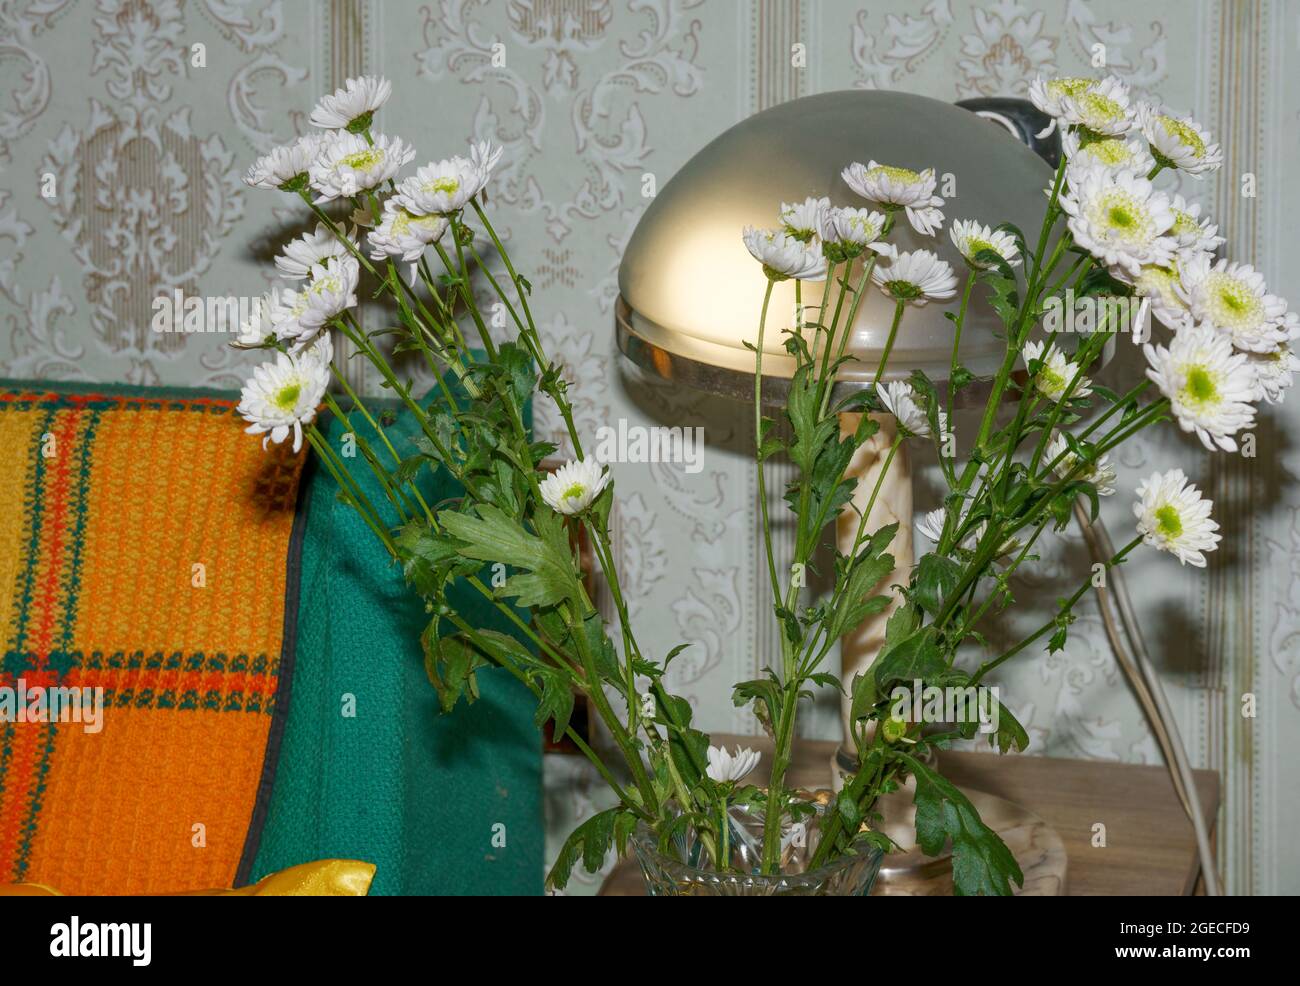 Close-up stilllife with chrysanthemum flowers and vintage table lamp with glass lampshade. Stock Photo